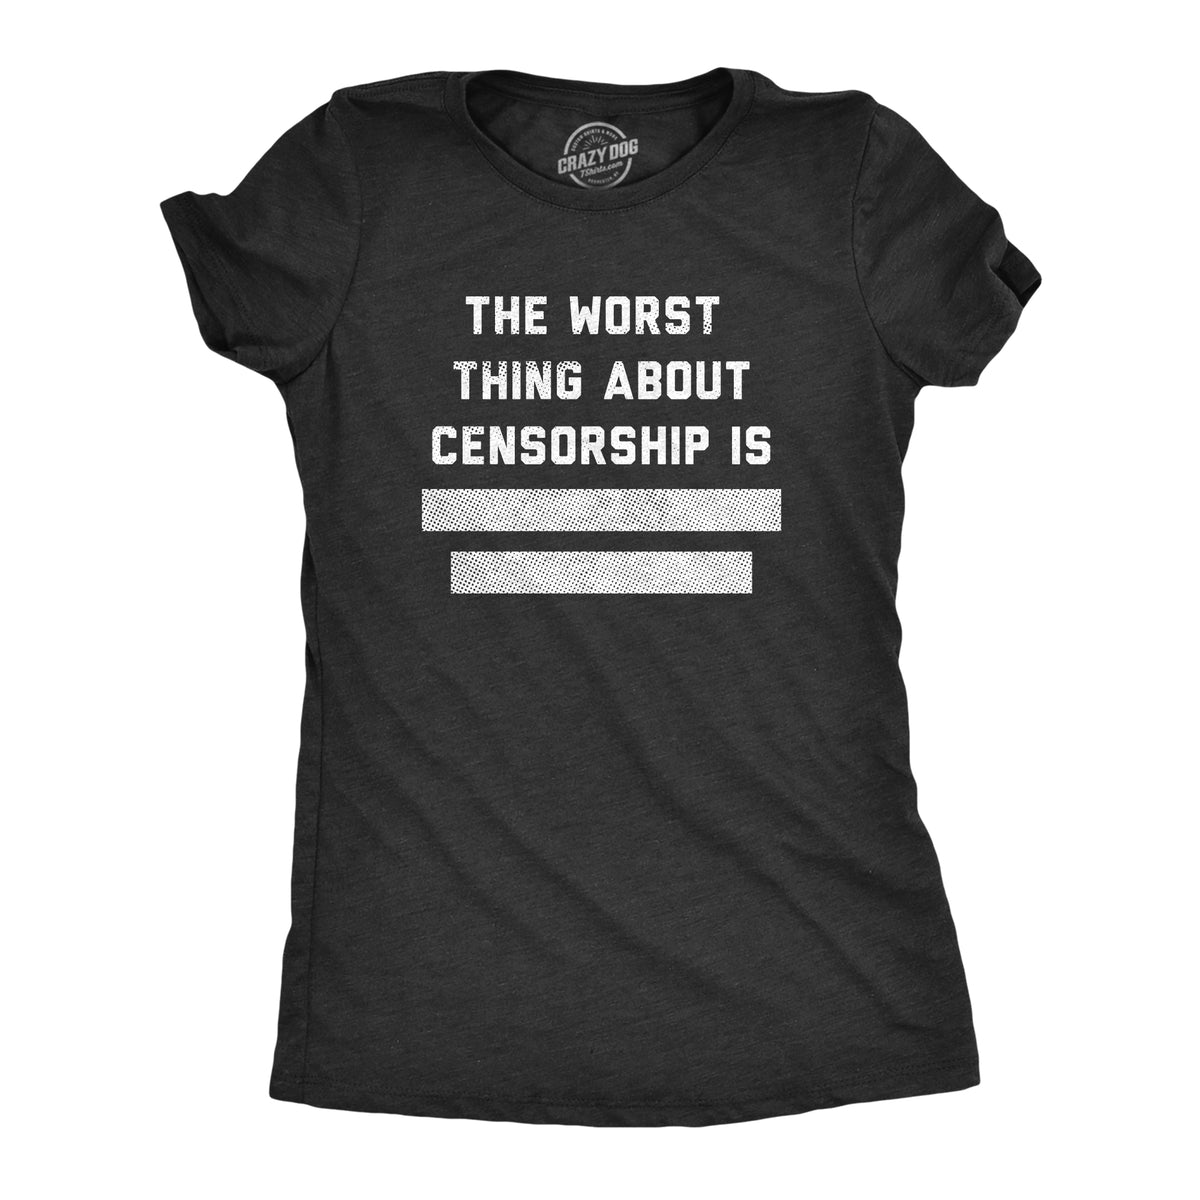 Funny Heather Black - CENSORSHIP The Worst Thing About Censorship Is Womens T Shirt Nerdy Sarcastic Tee